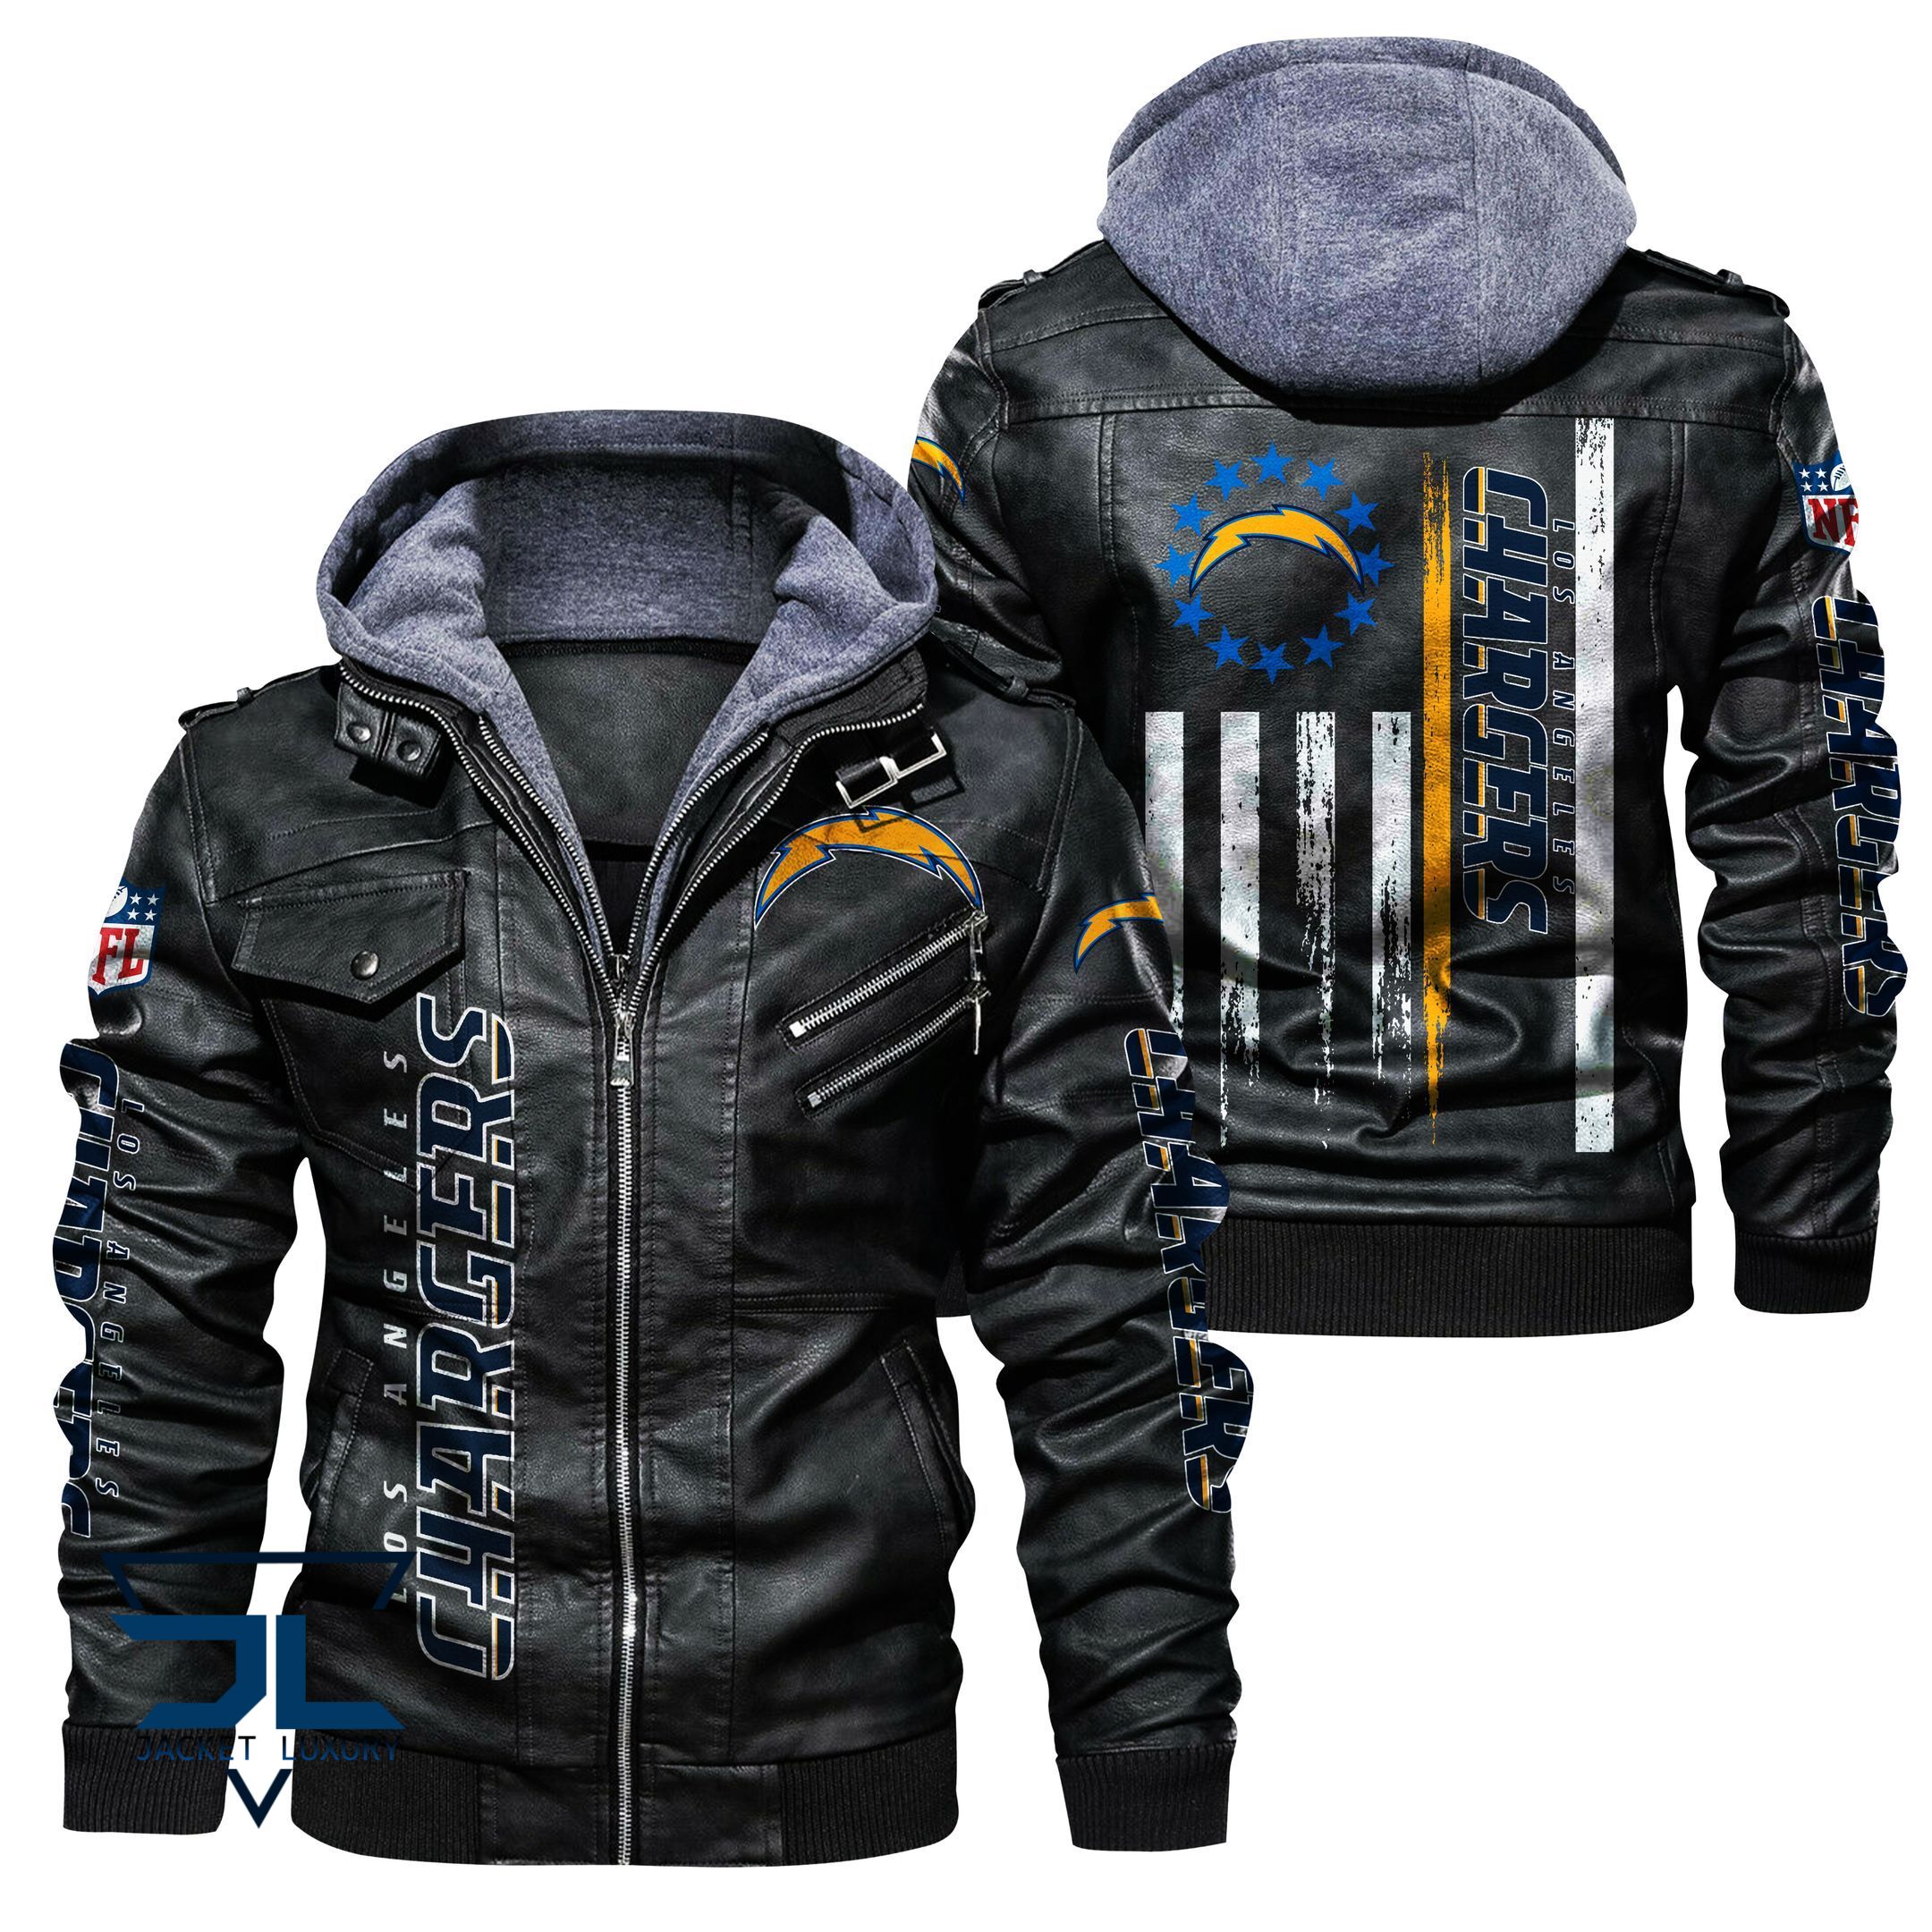 100+ best selling leather jacket on Tezostore 2022 85